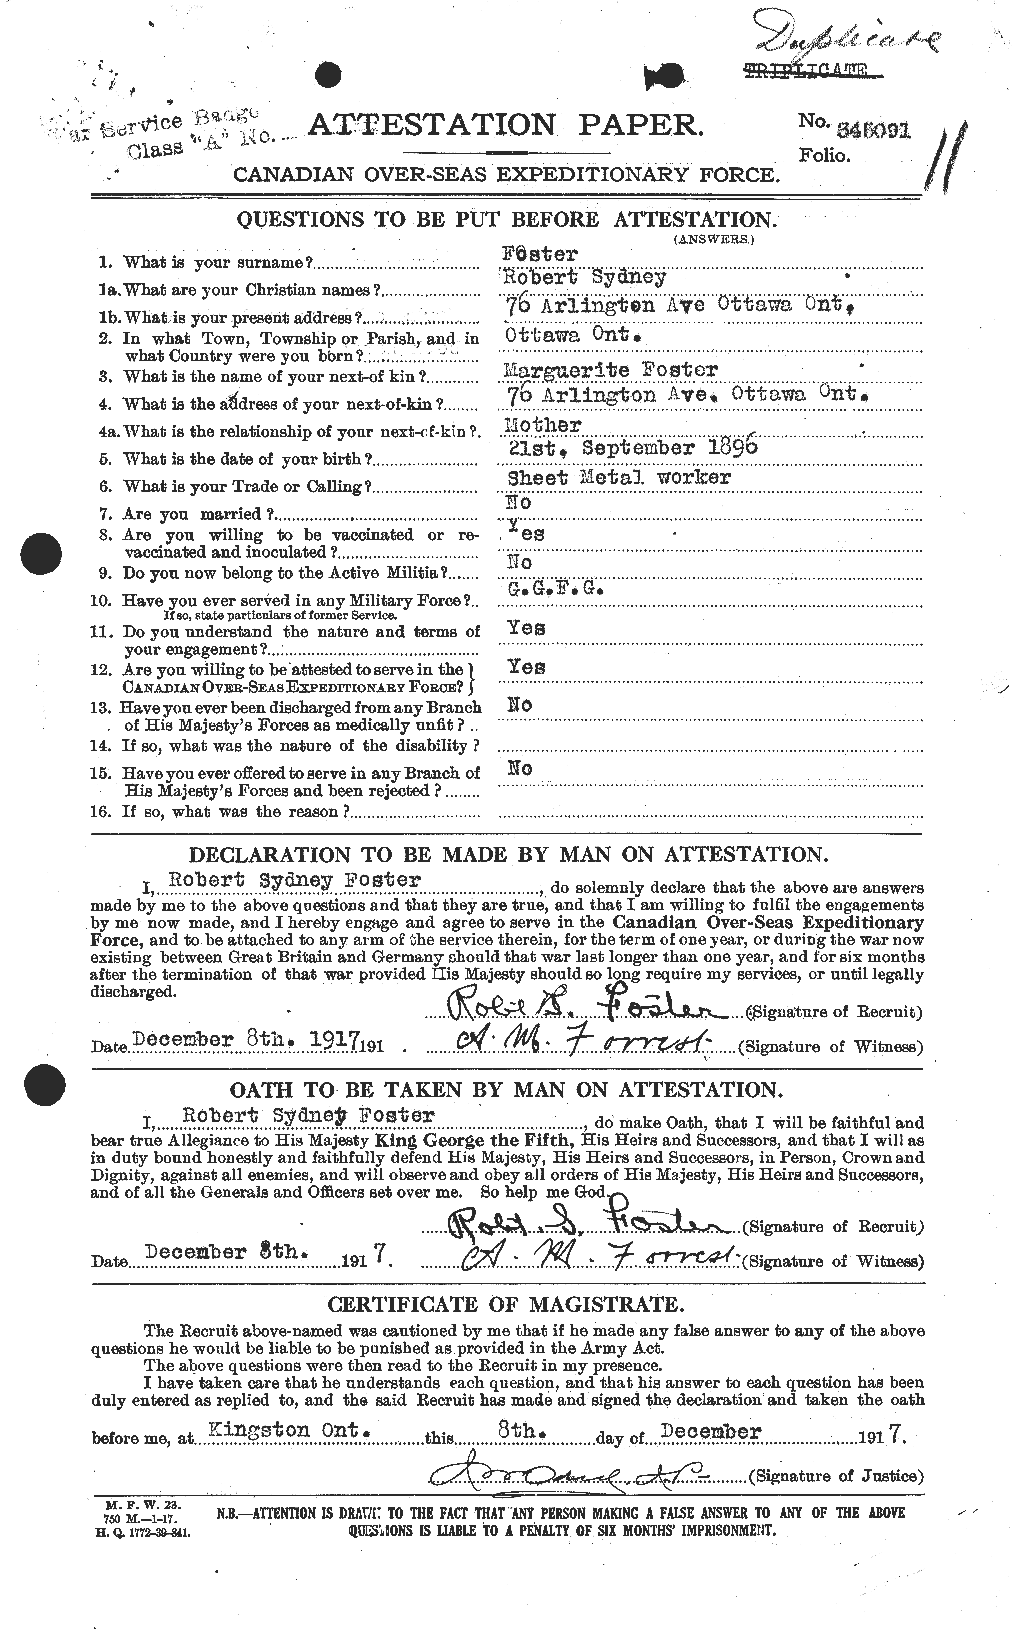 Personnel Records of the First World War - CEF 335187a